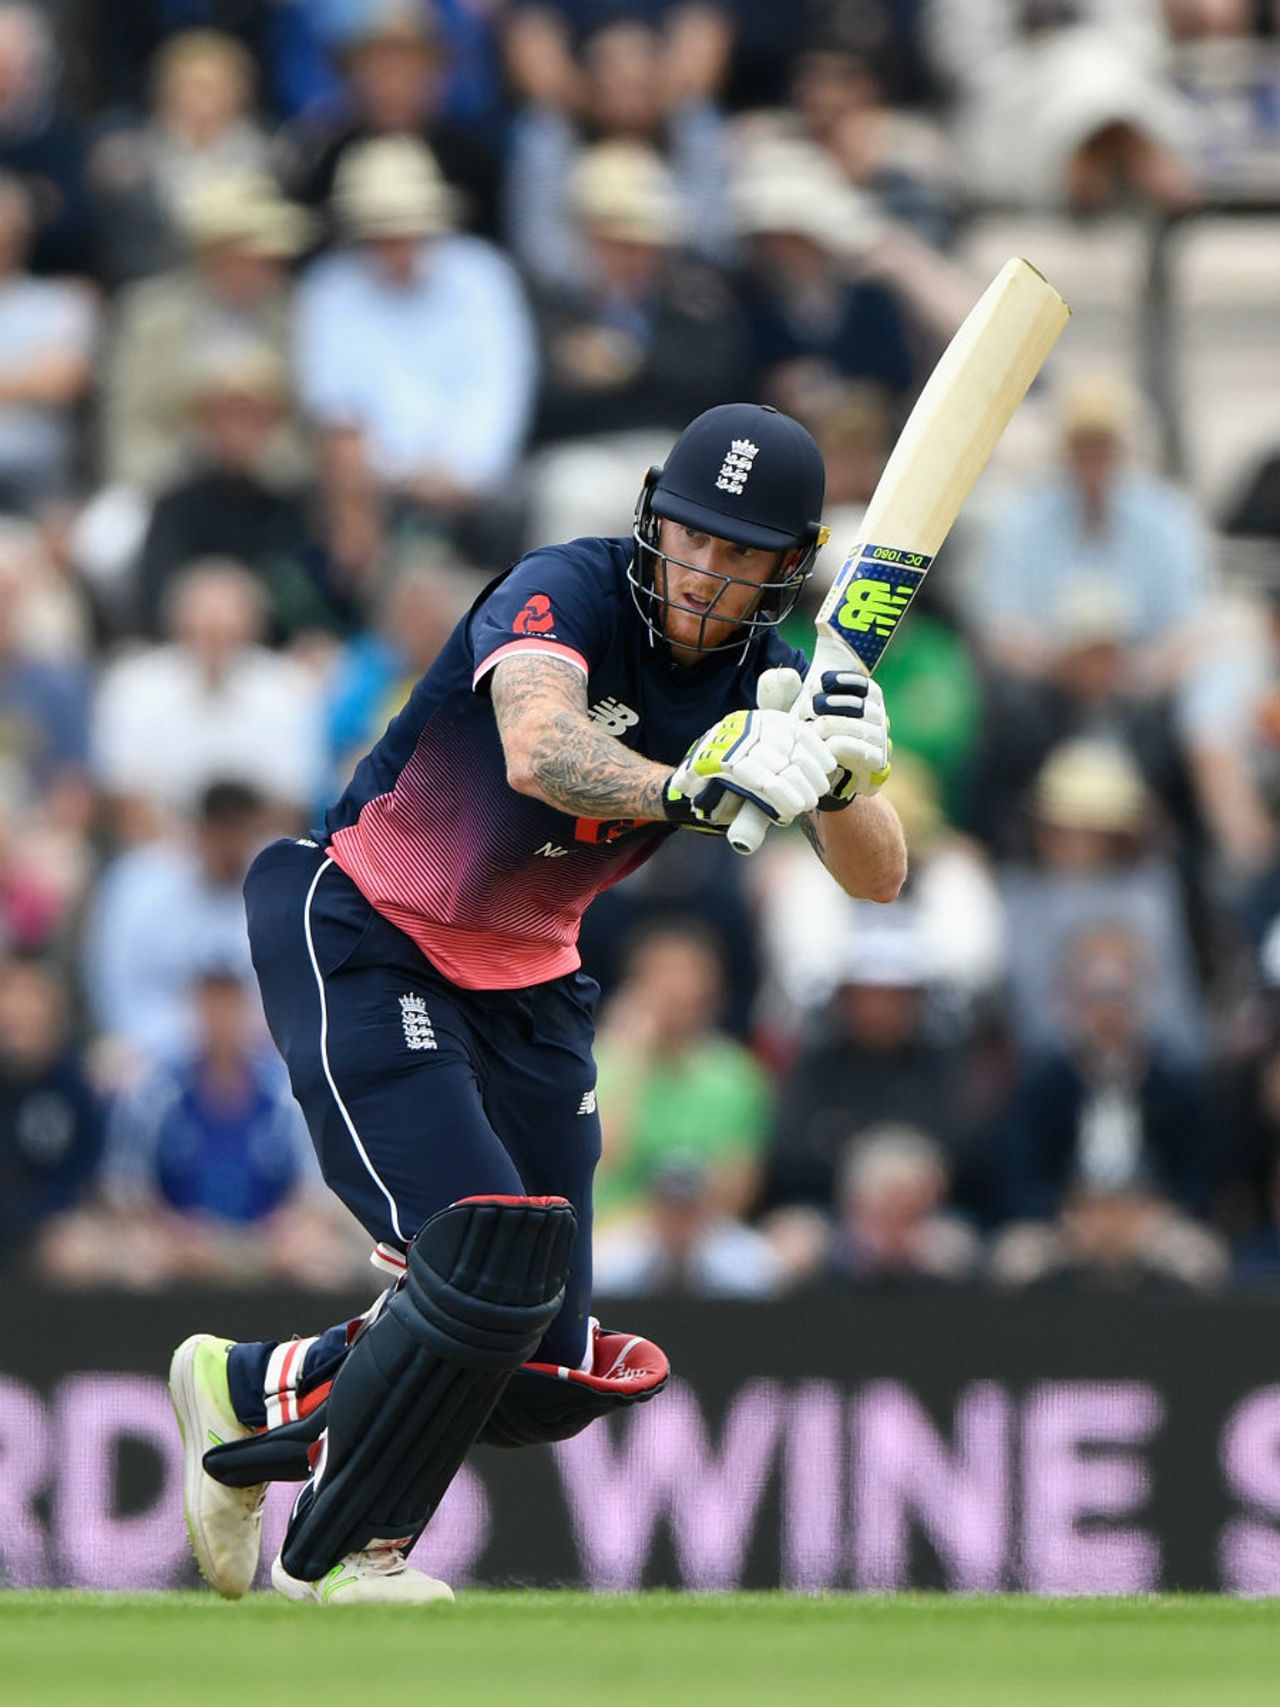 Ben Stokes survived an early let-off but showed no ill effects of his knee injury, England v South Africa, 2nd ODI, Ageas Bowl, May 27, 2017